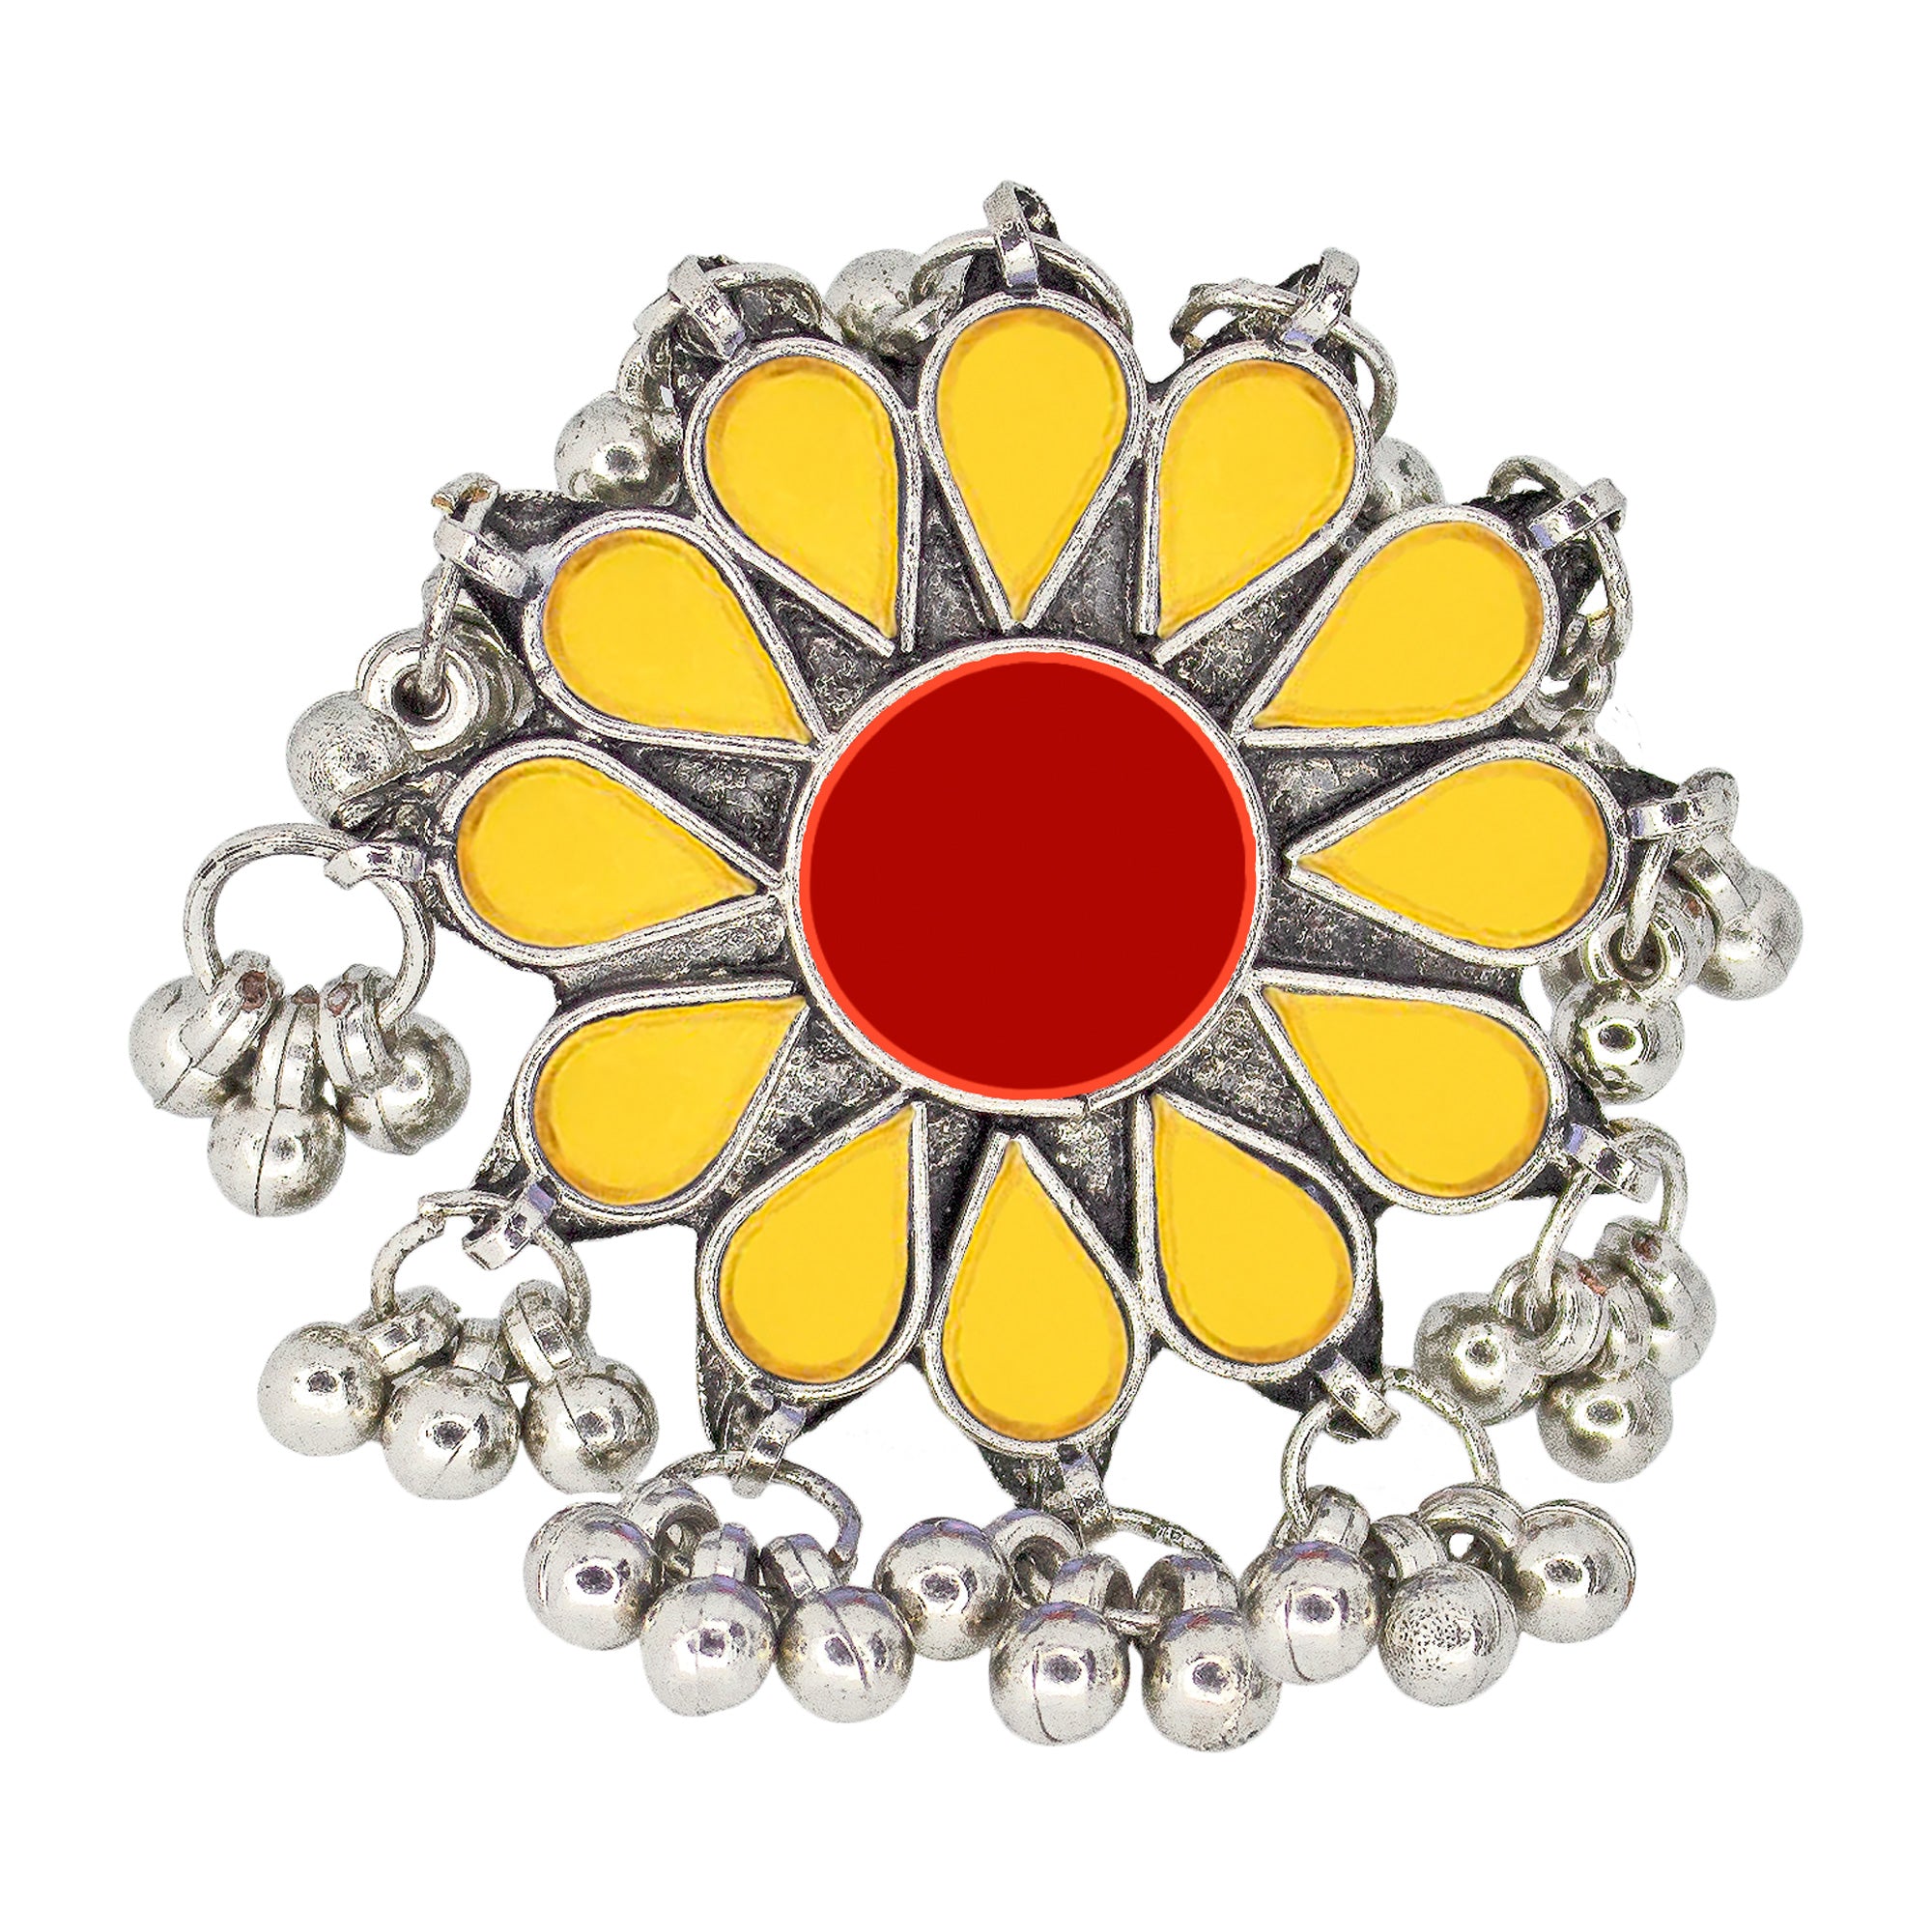 Abhinn Designer Silver Oxidised Floral Yellow-Red Color Glass Premium Rings For Women